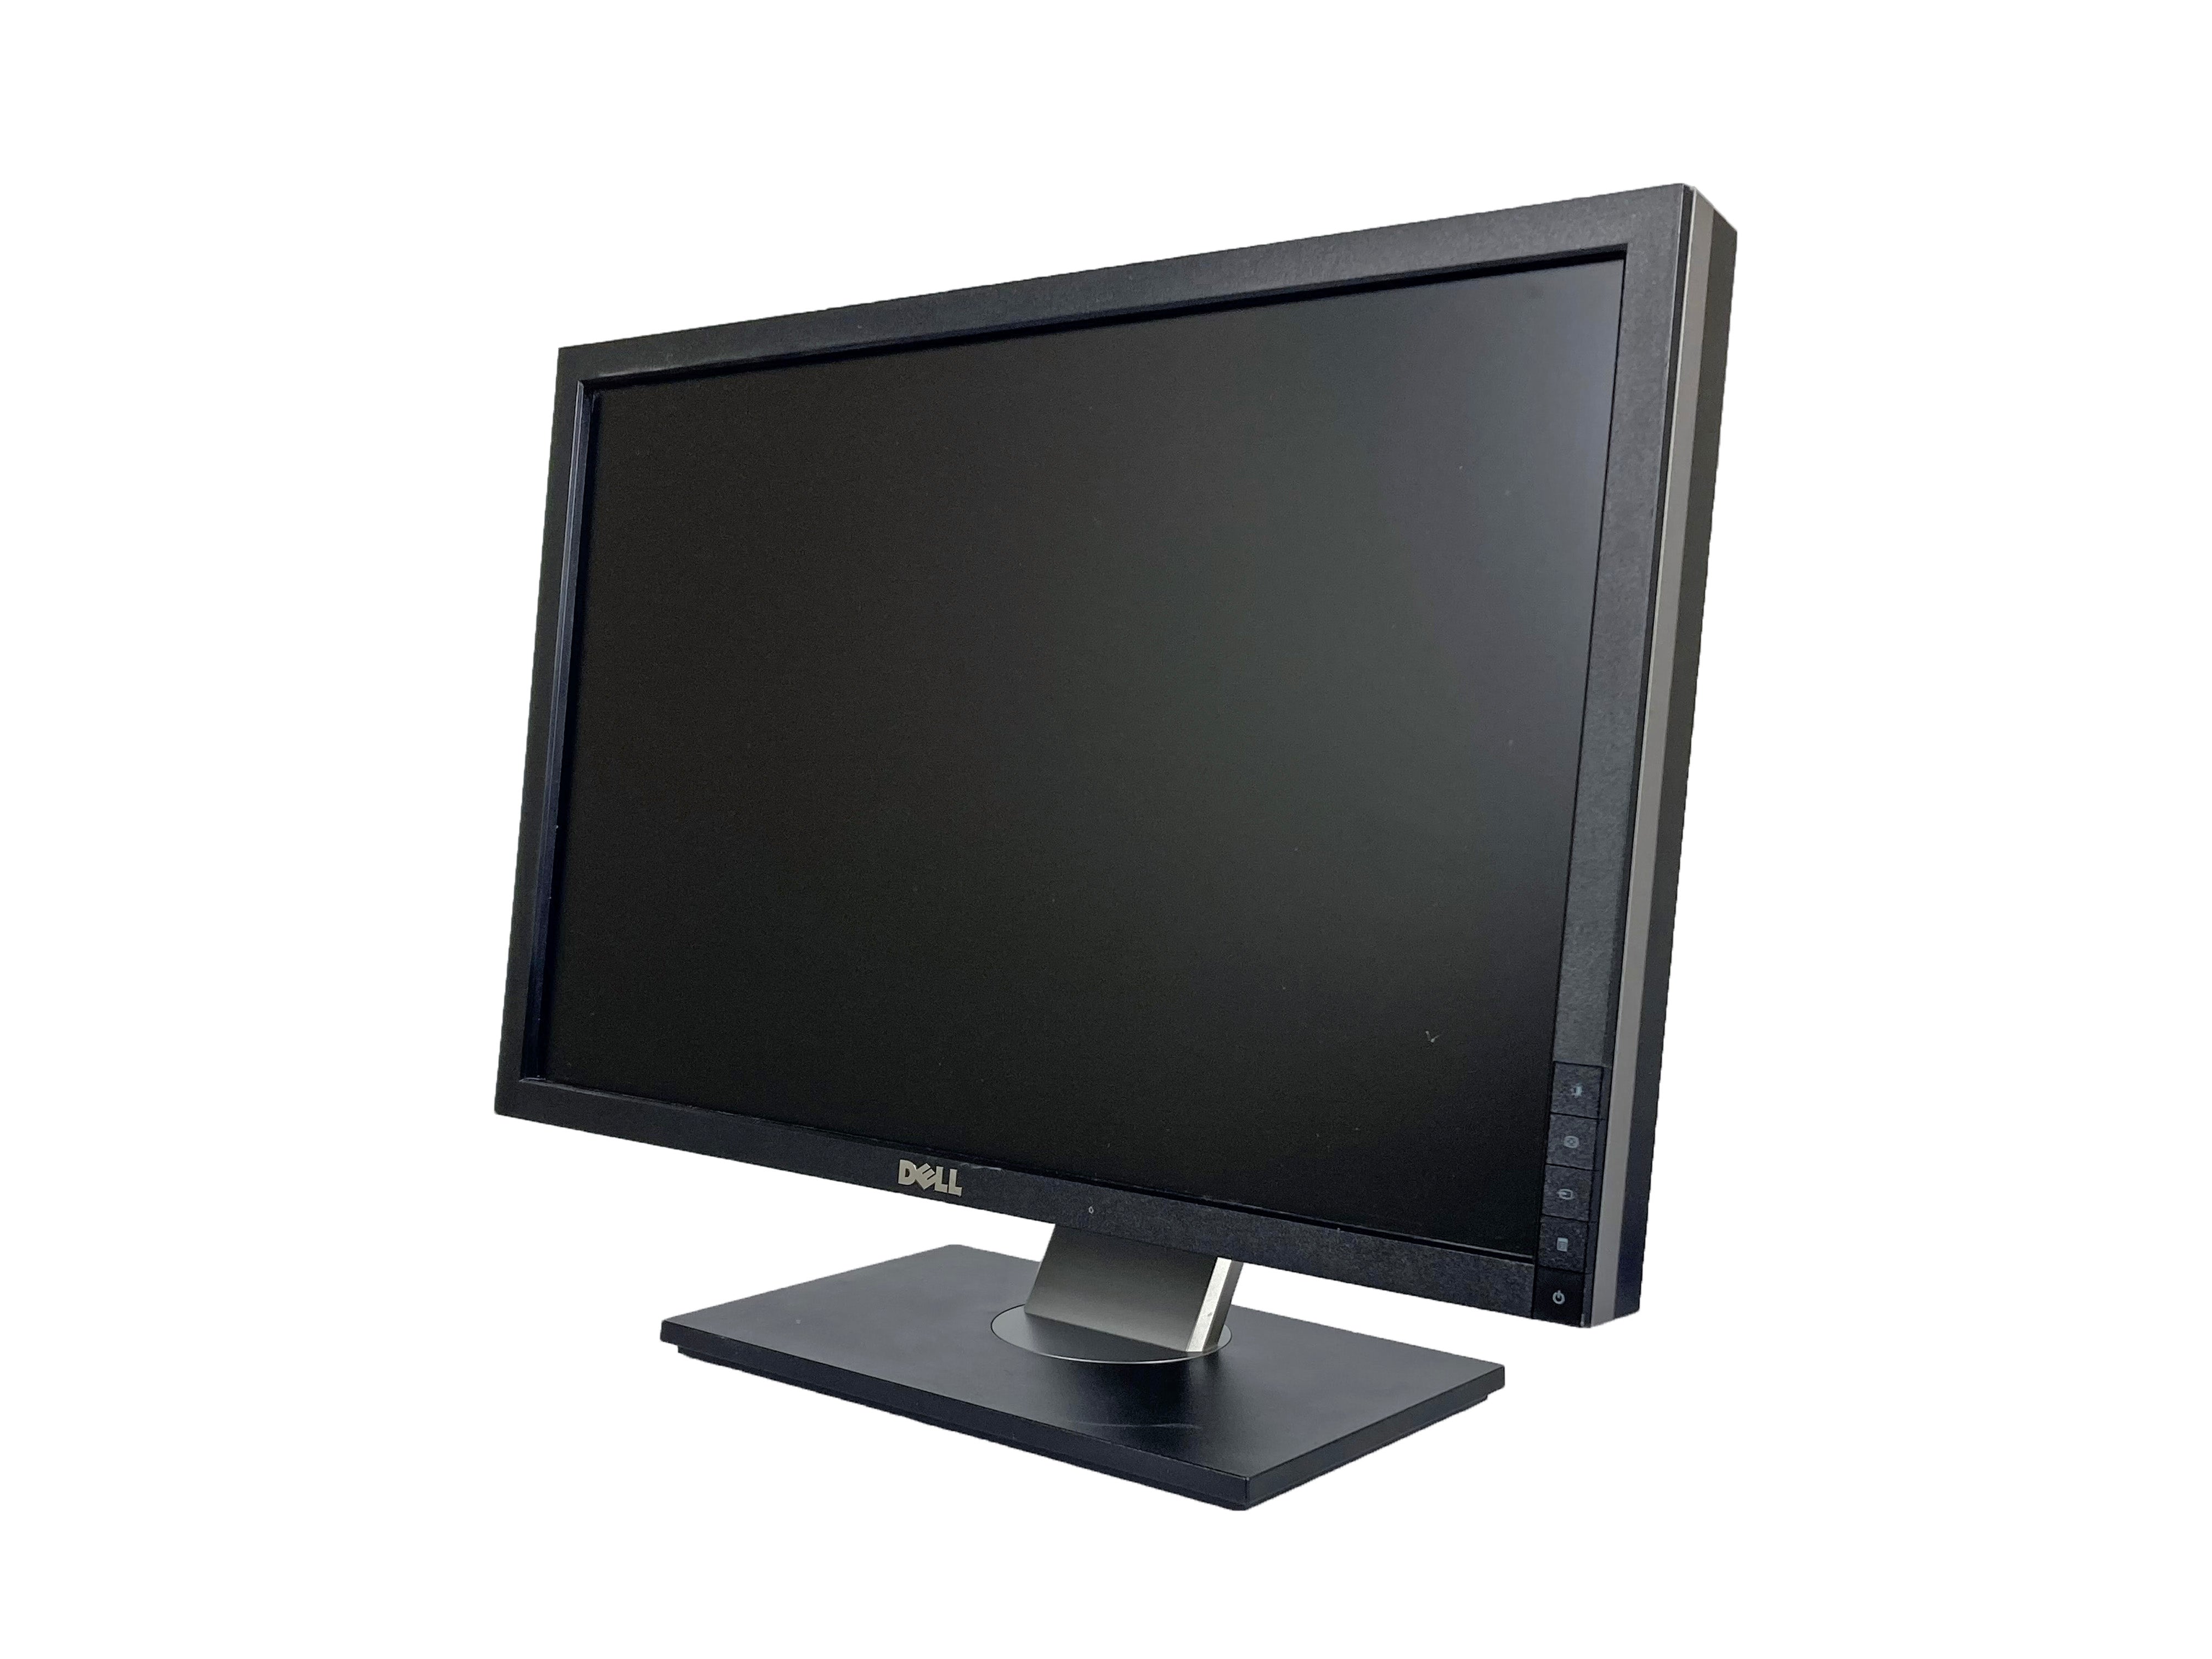 Dell 2209WAf 22" Widescreen LCD Monitor